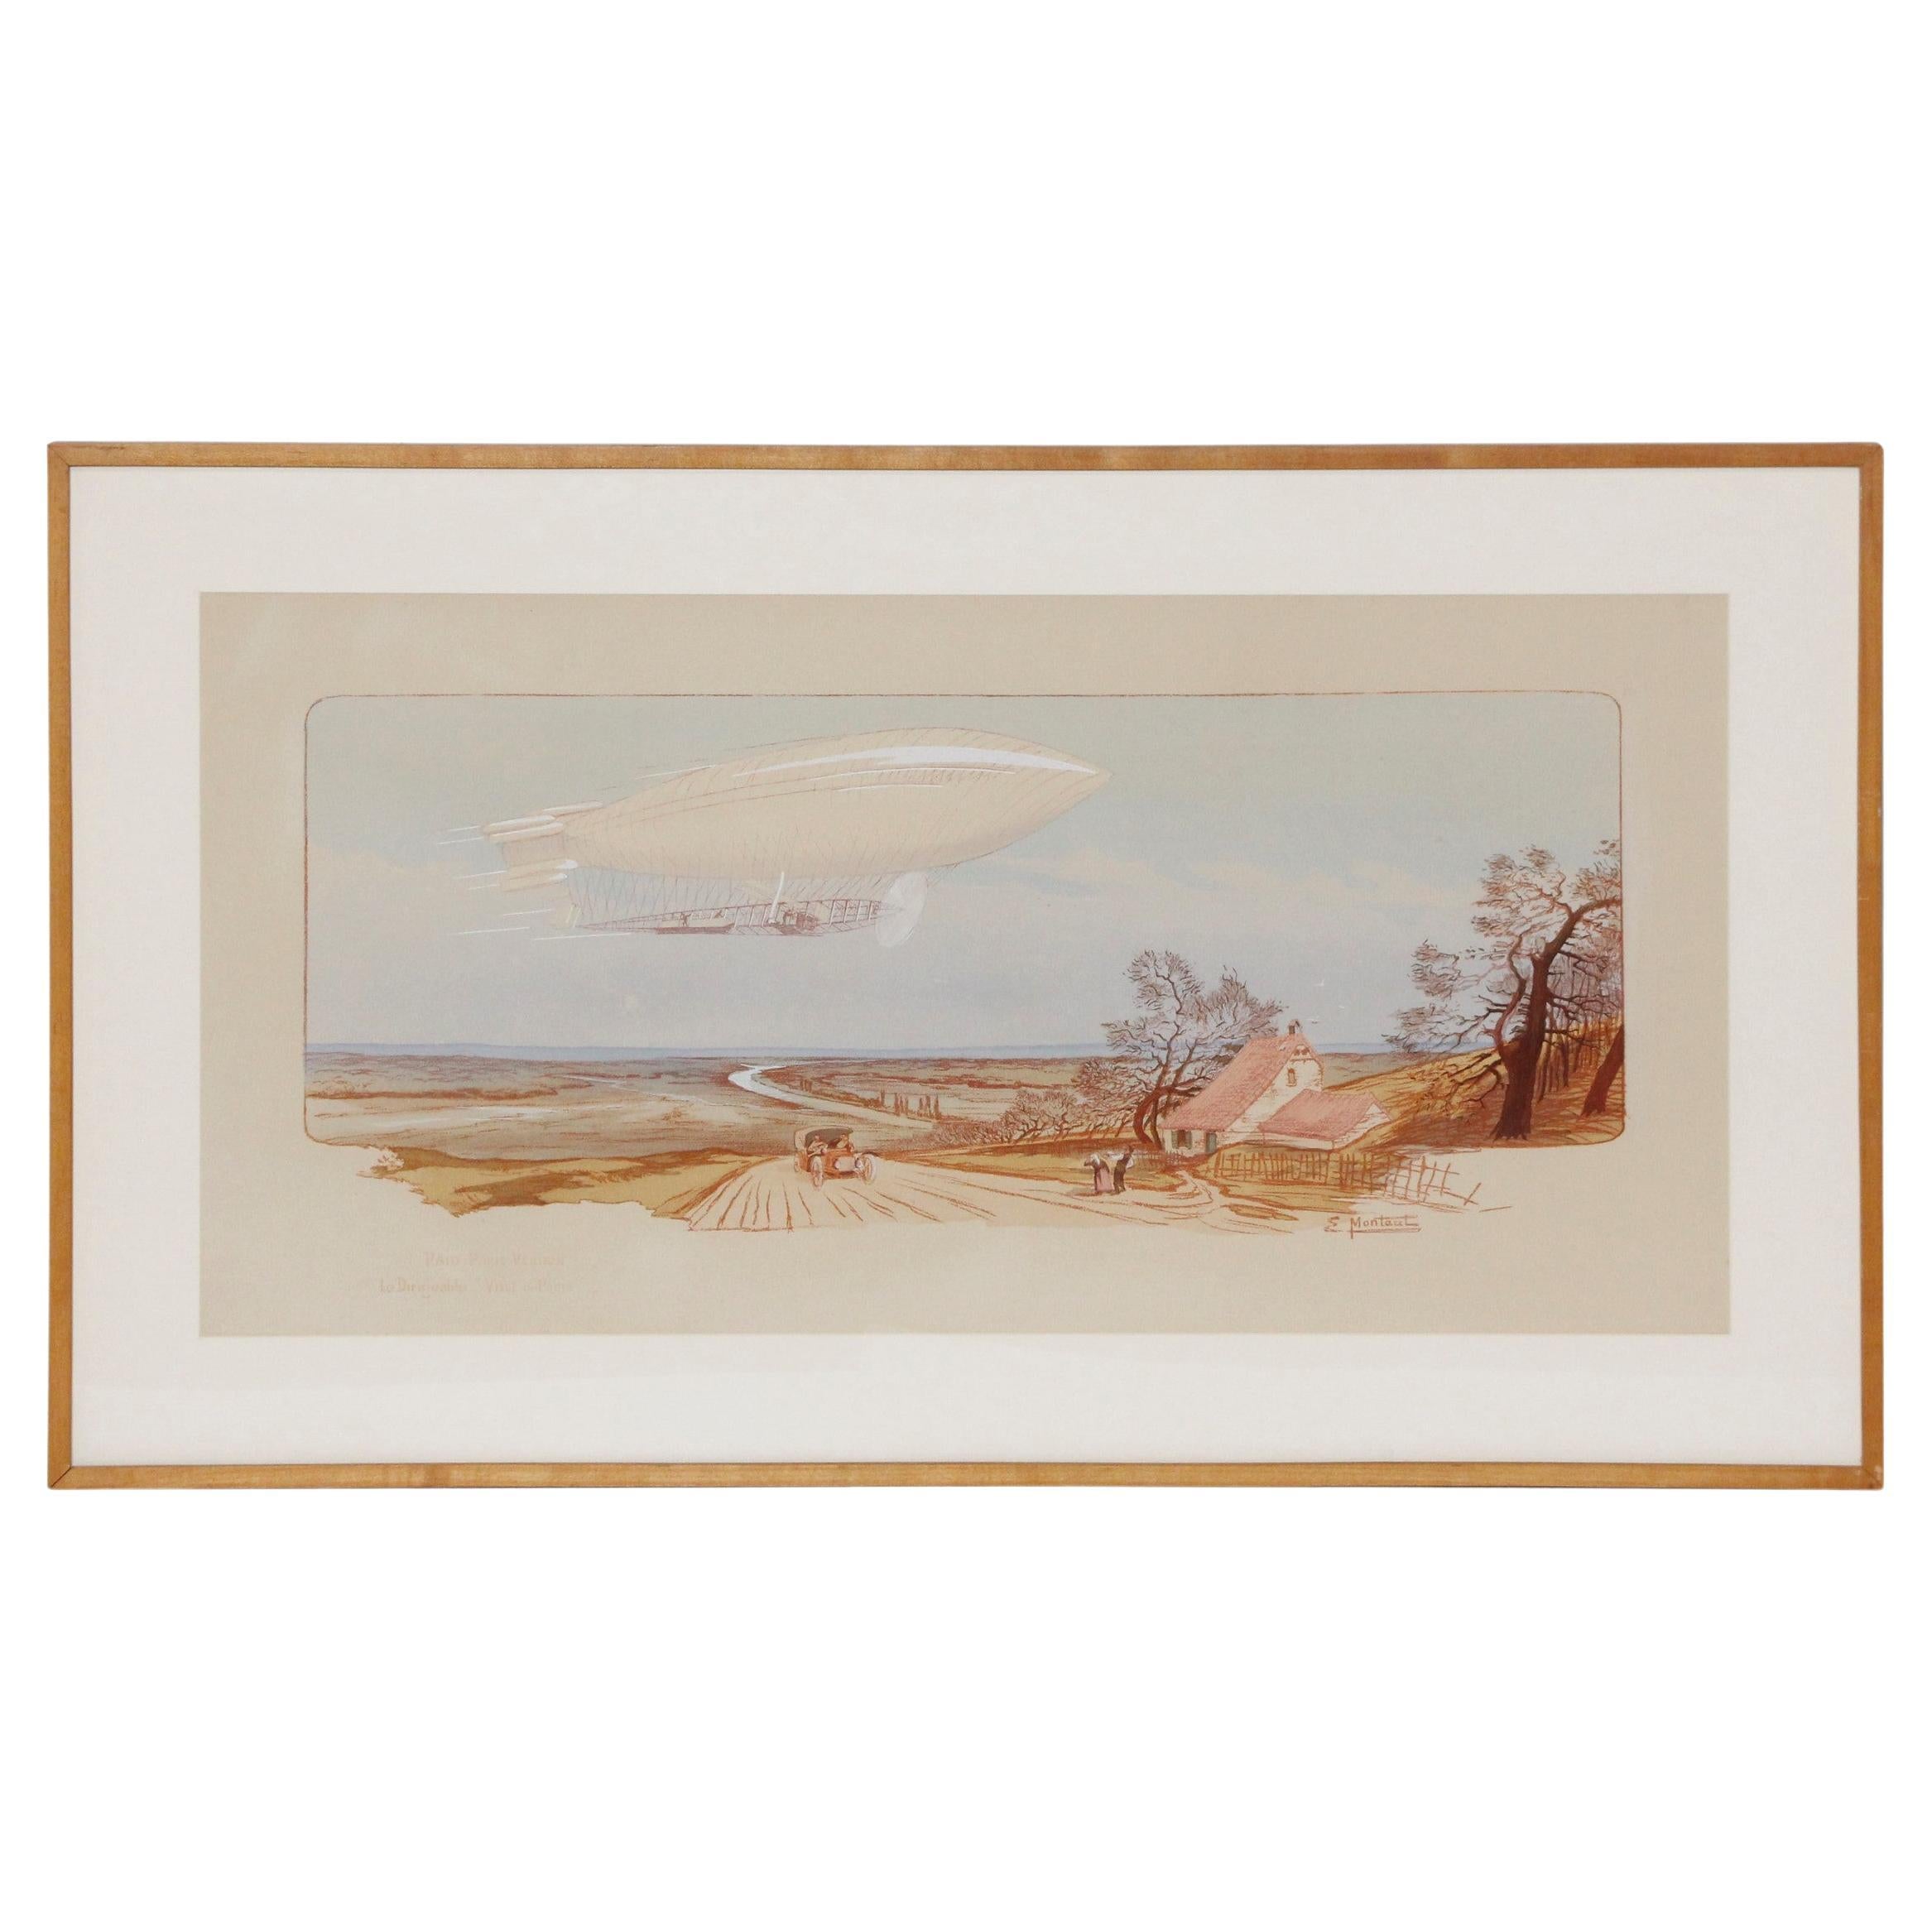 Sighting Zeppelin Matted Framed French Lithograph Signed E(arnest) Montaut For Sale